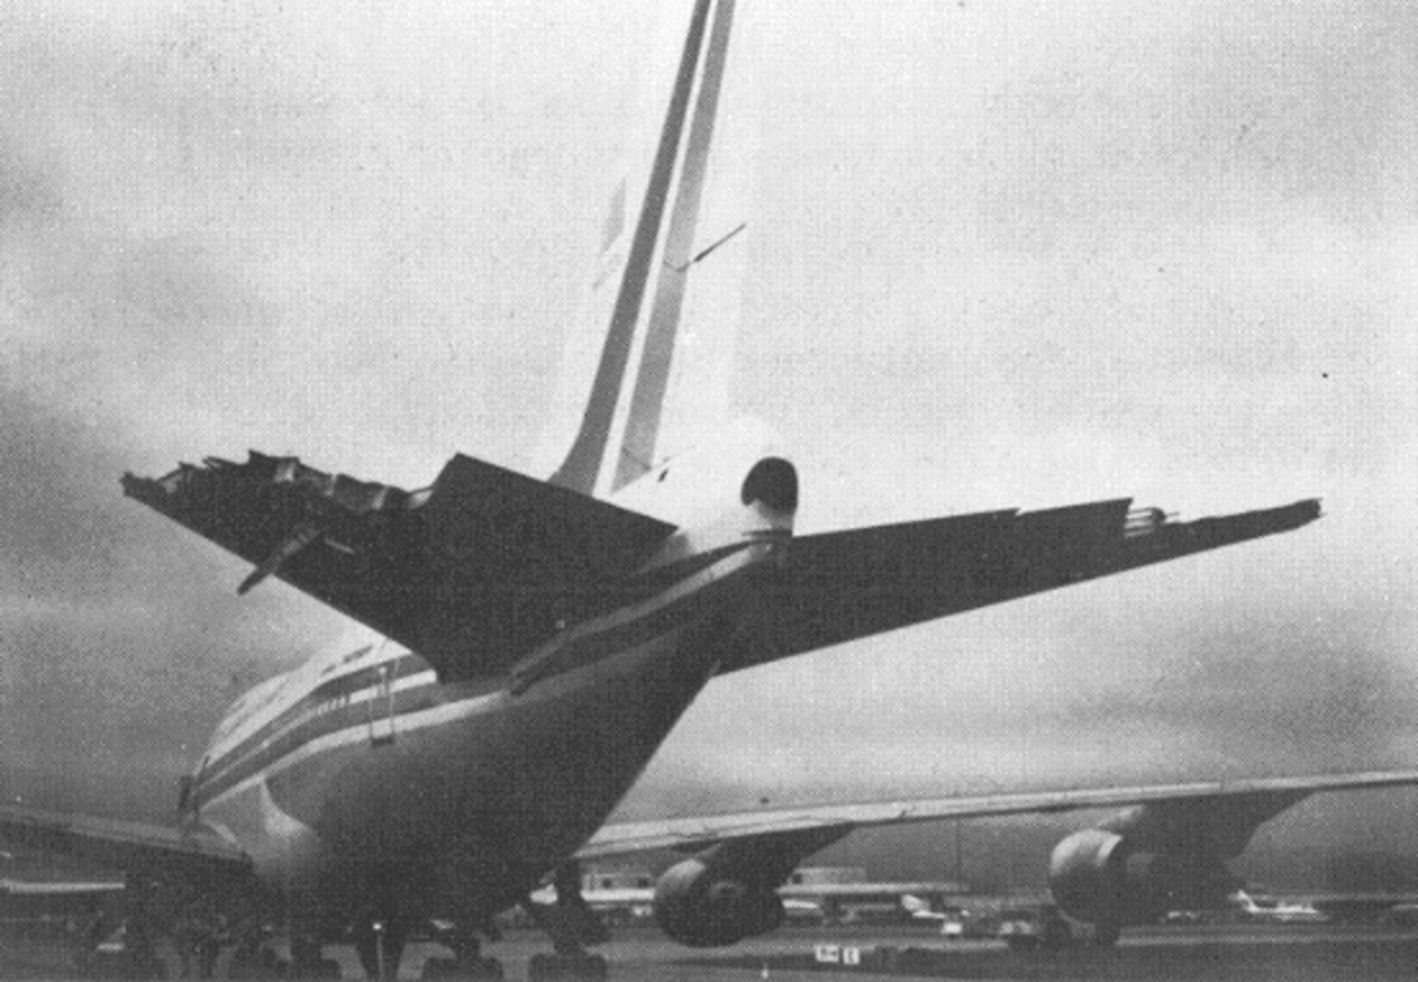 The Damaged empennage of The Boeing 747SP involved with China Airlines Flight 006.